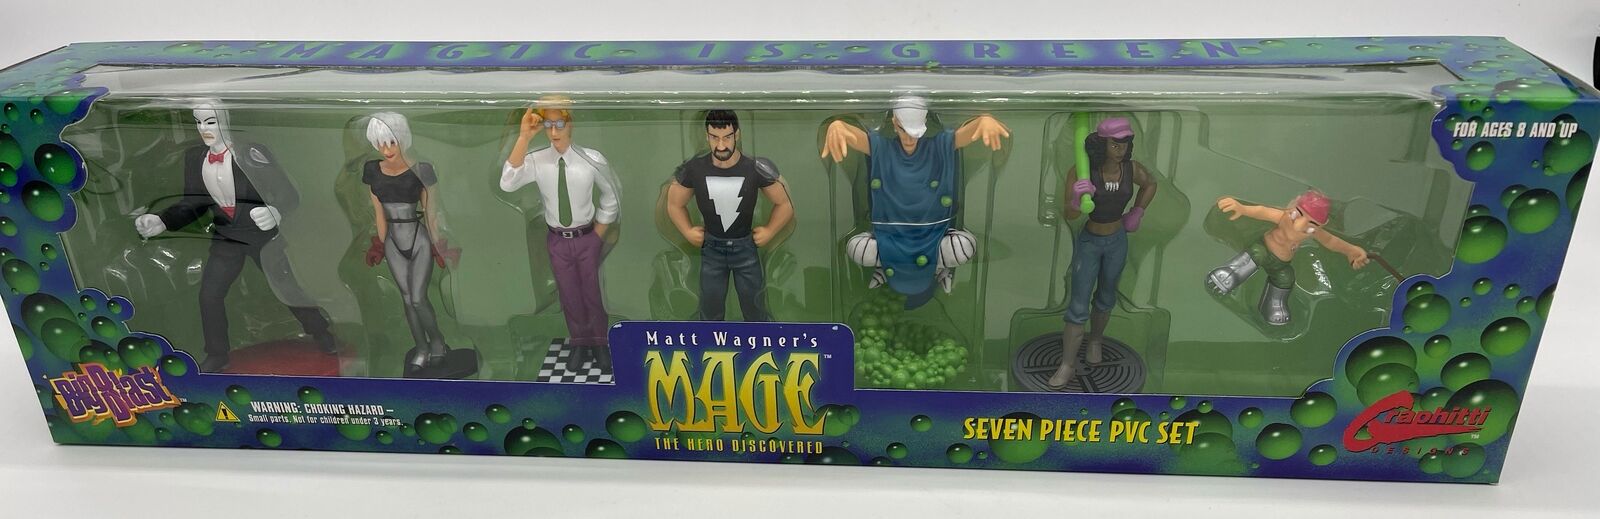 Matt Wagner's Mage The Hero Discovered Seven Piece PVC Set *NEW*